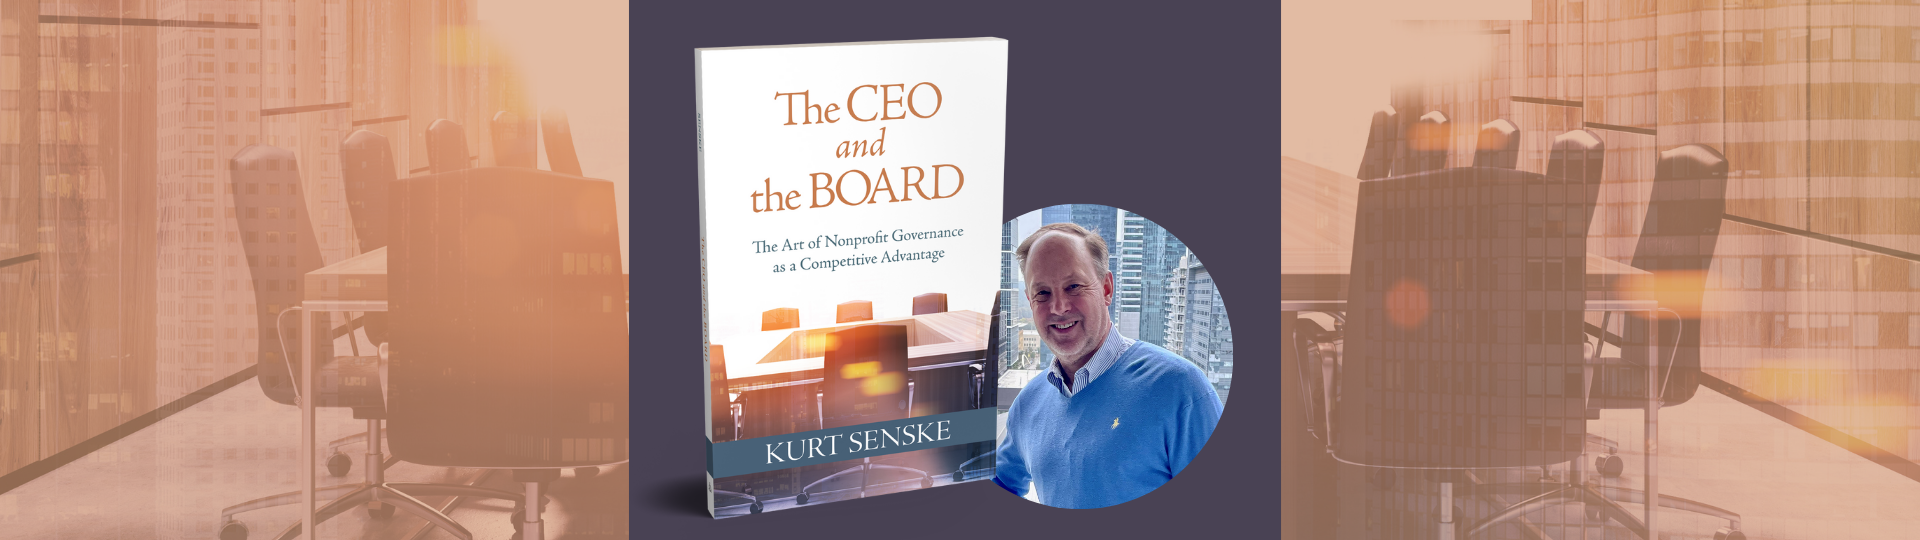 Press Release: “This is a book for which nonprofit CEOs and boards have been waiting.”